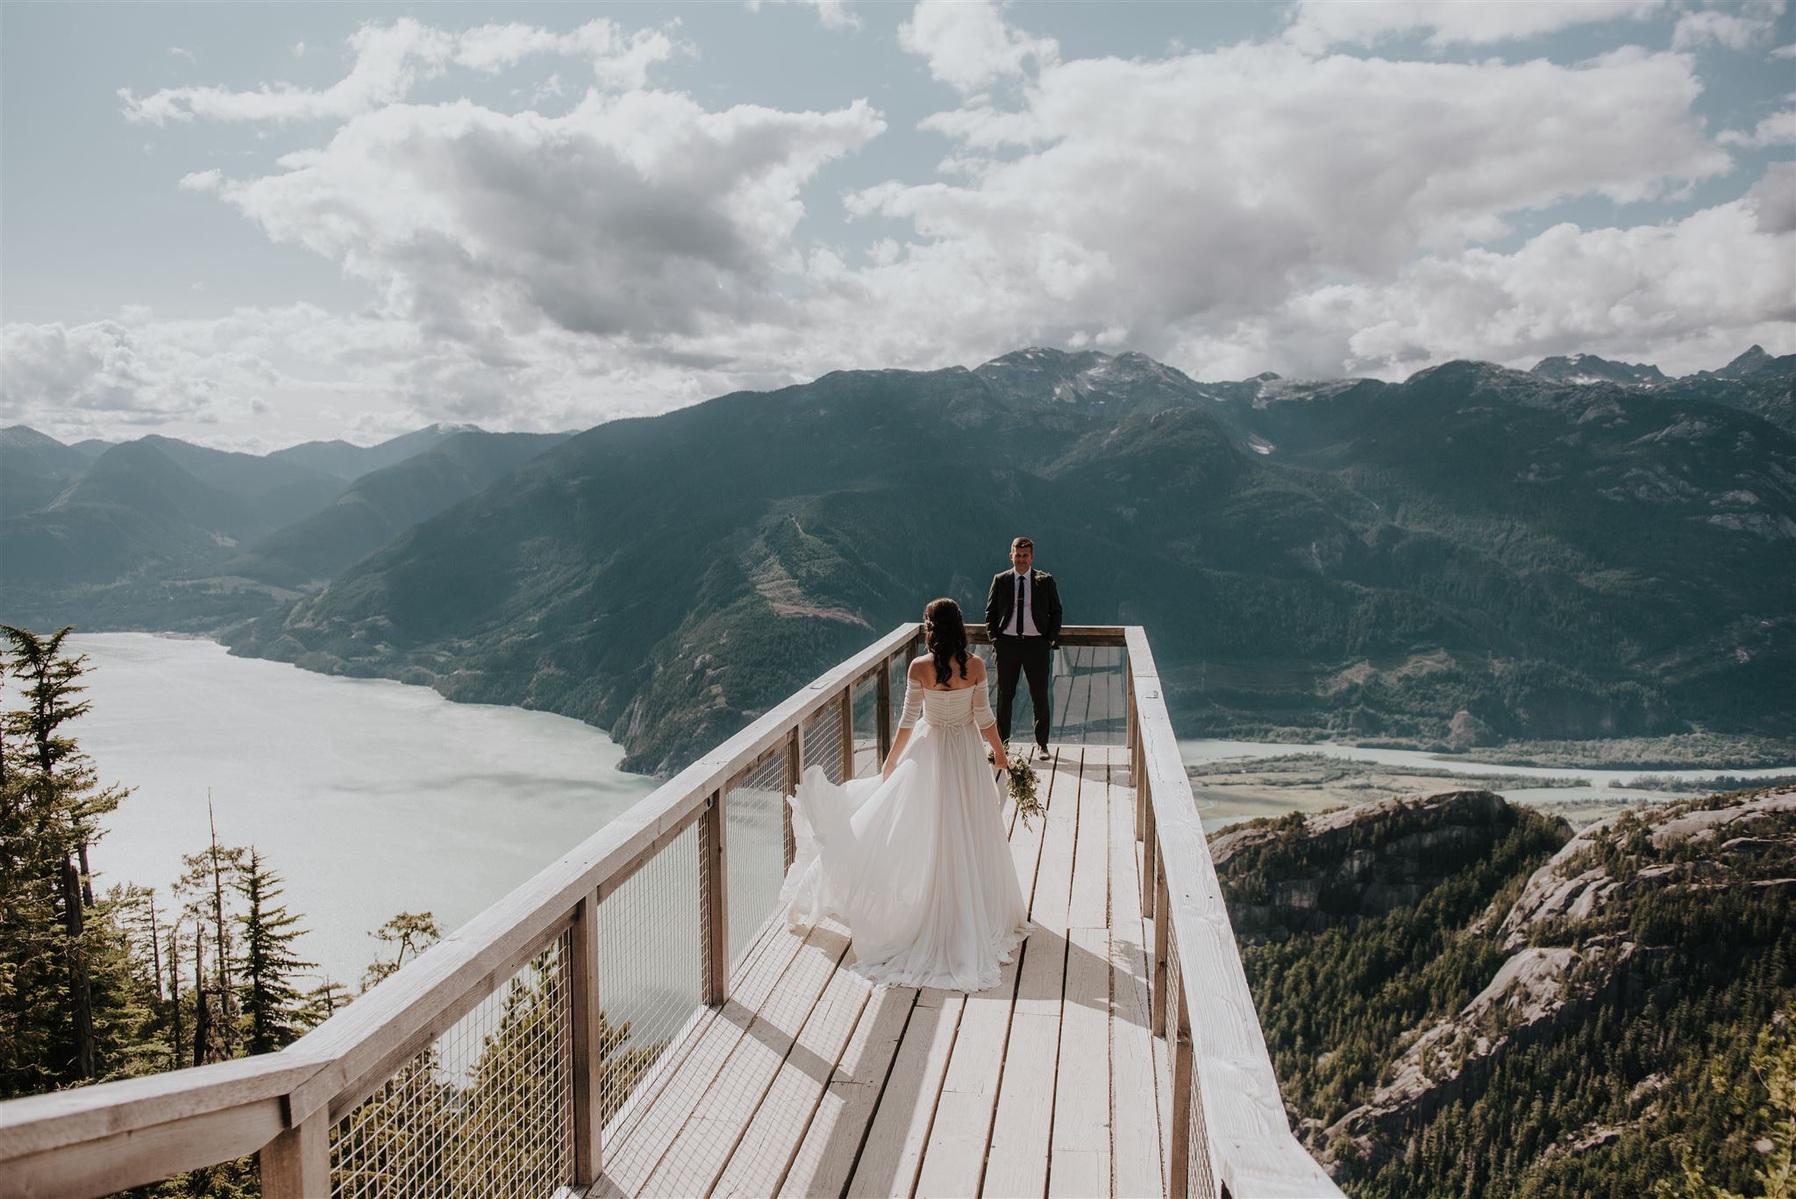 Squamish wedding venue, the perfect location. Wedding officiant, wedding celebrant and hair and make up artist in Squamish. 